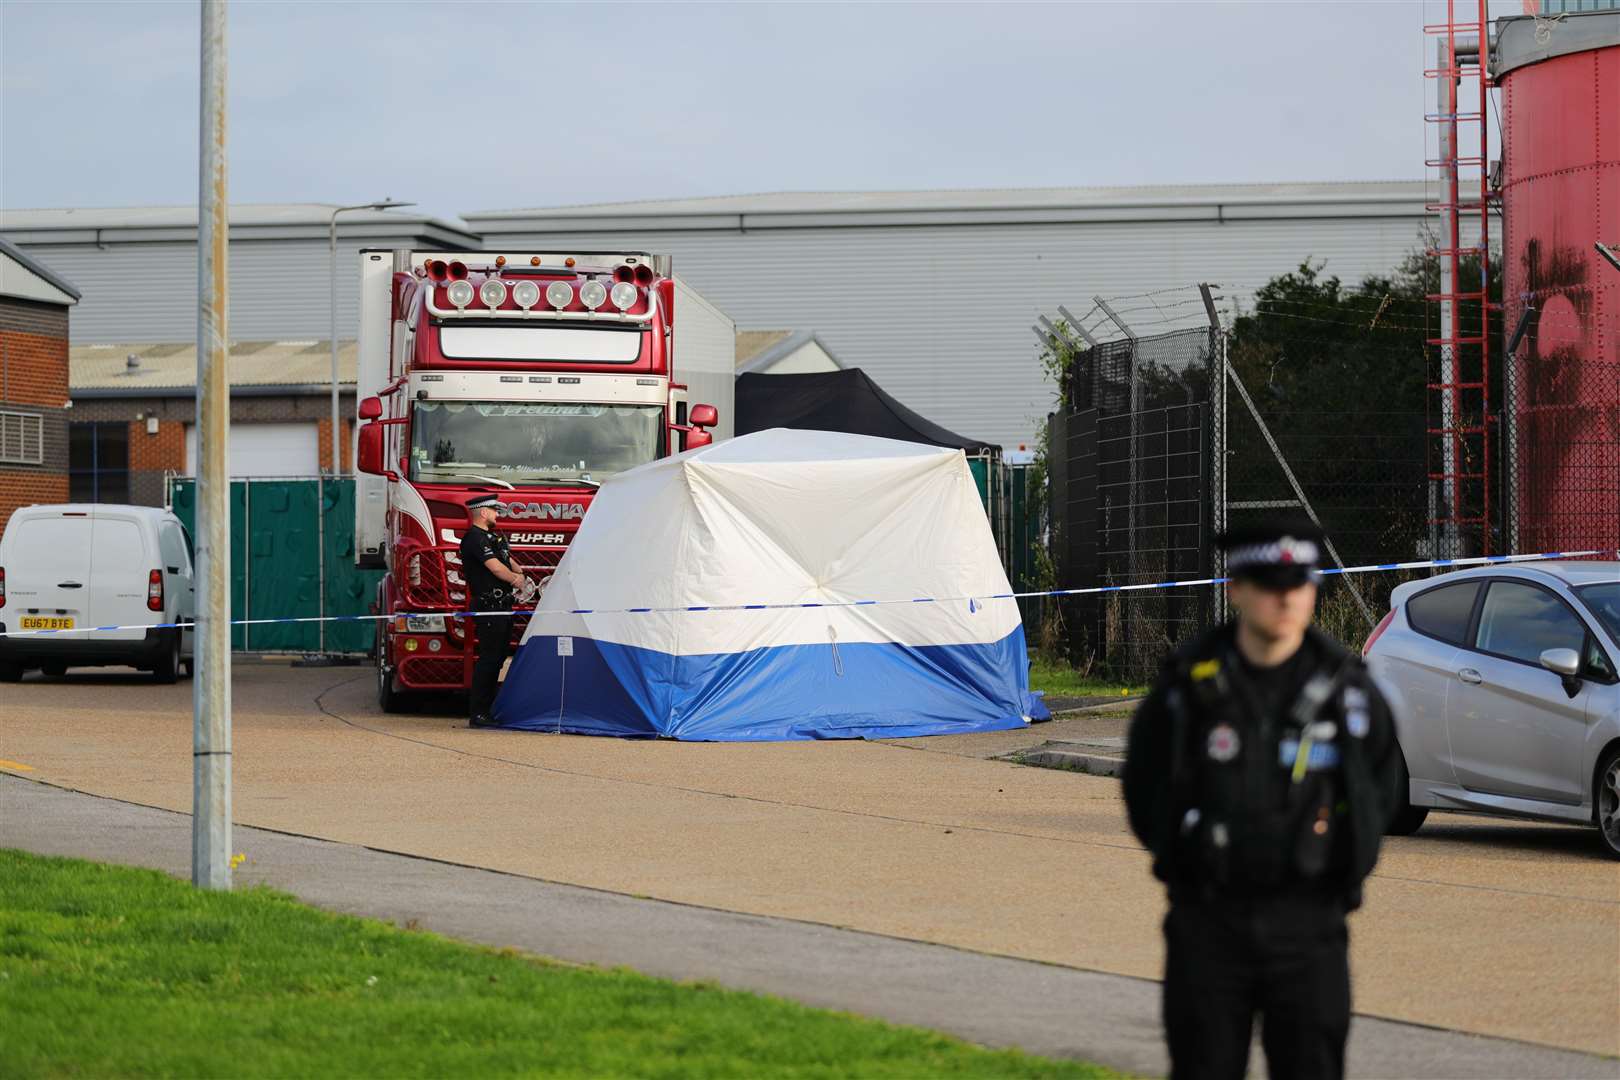 Police activity at the scene in Essex (Aaron Chown/PA)